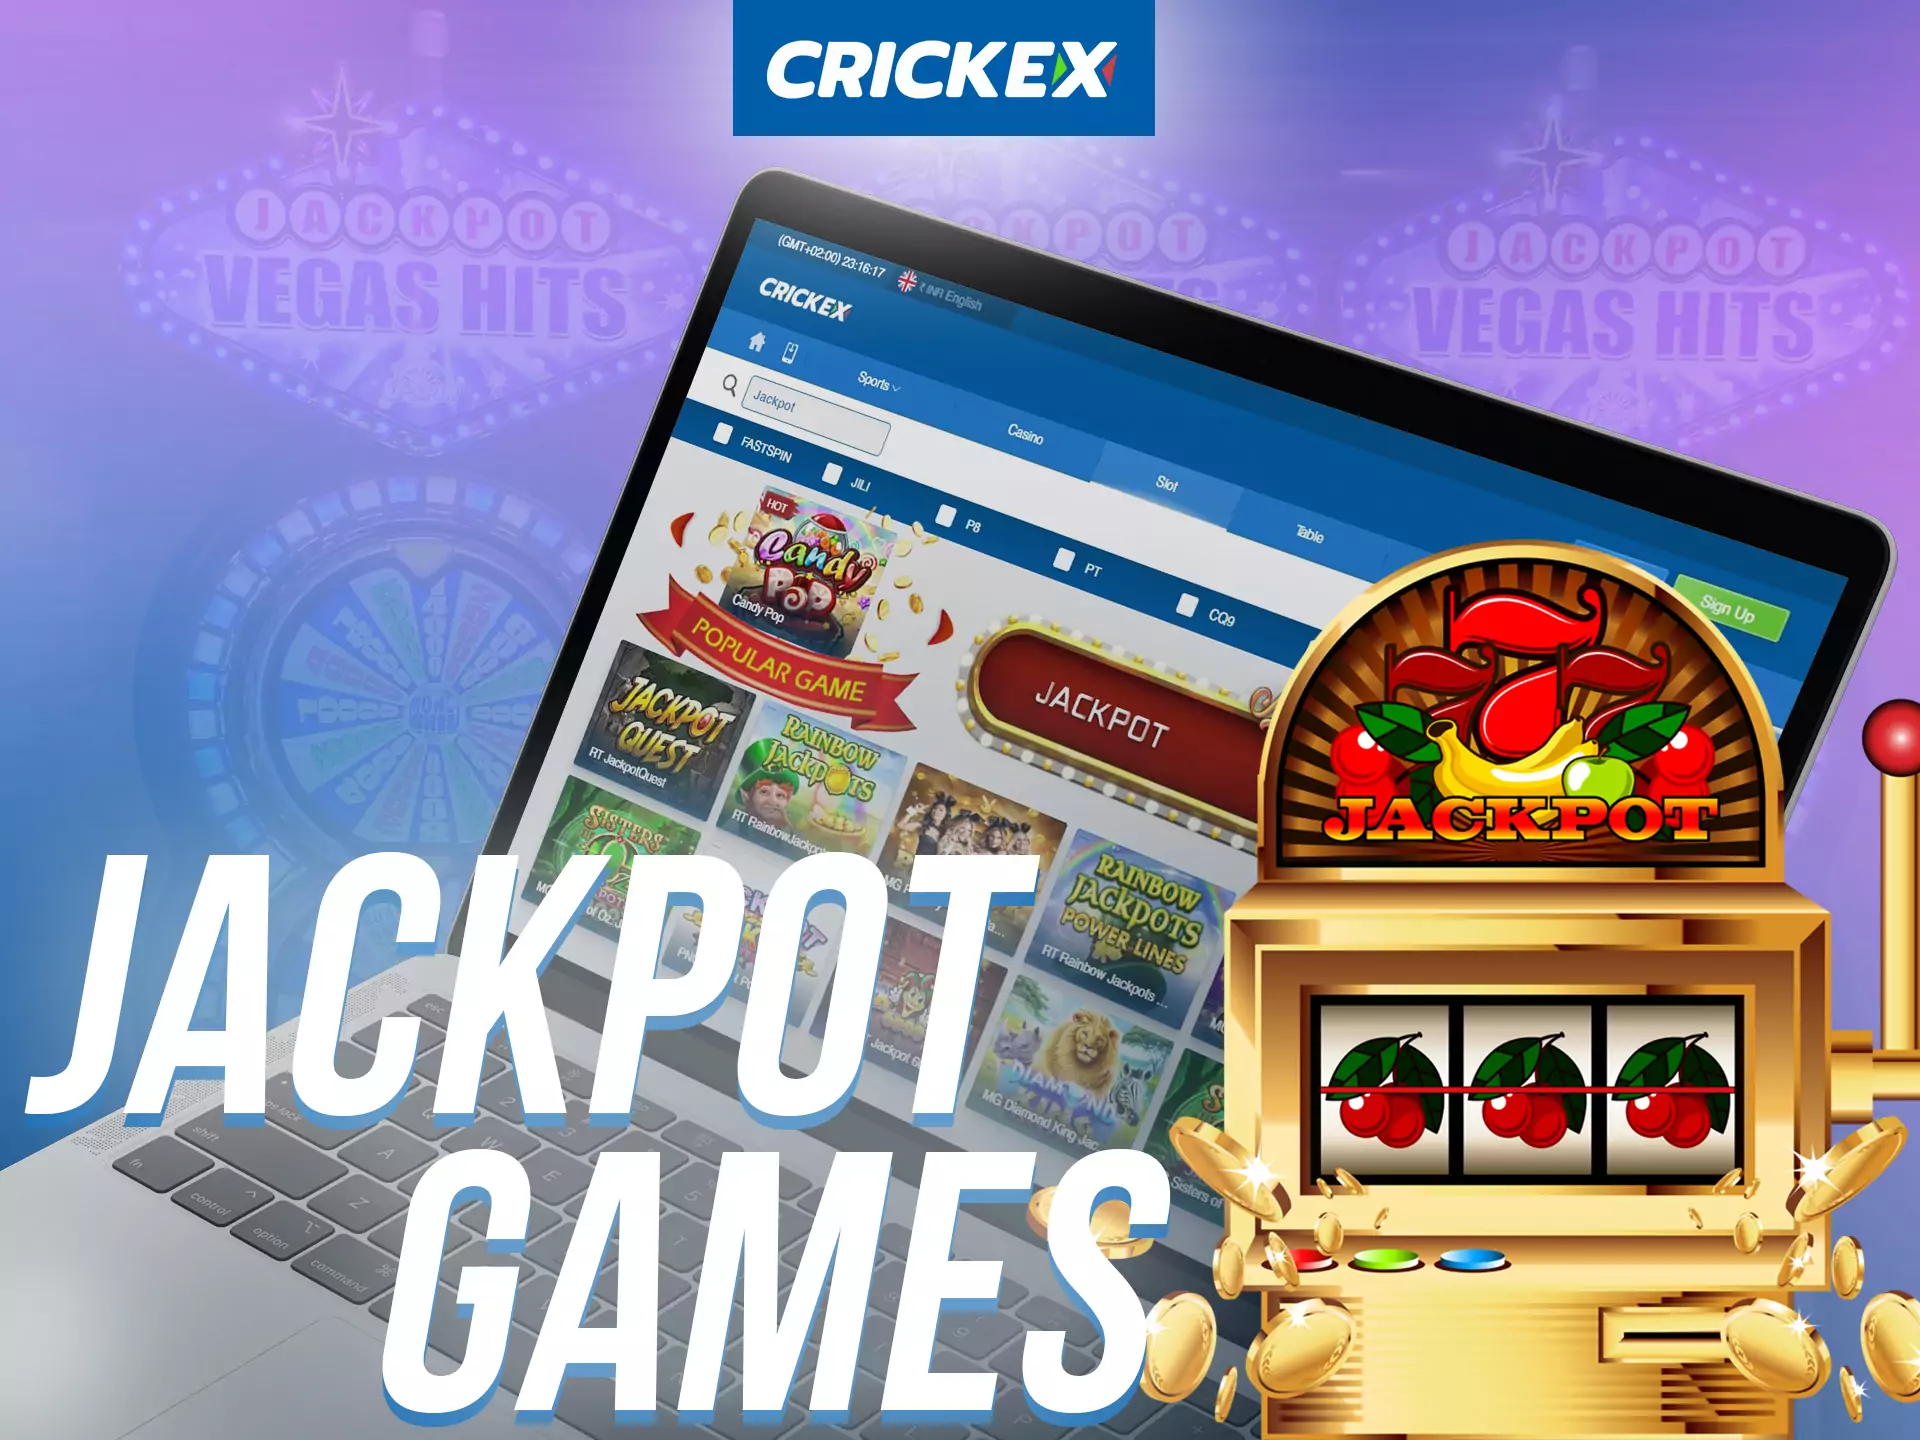 Bet on your luck in the jackpot game at Crickex.